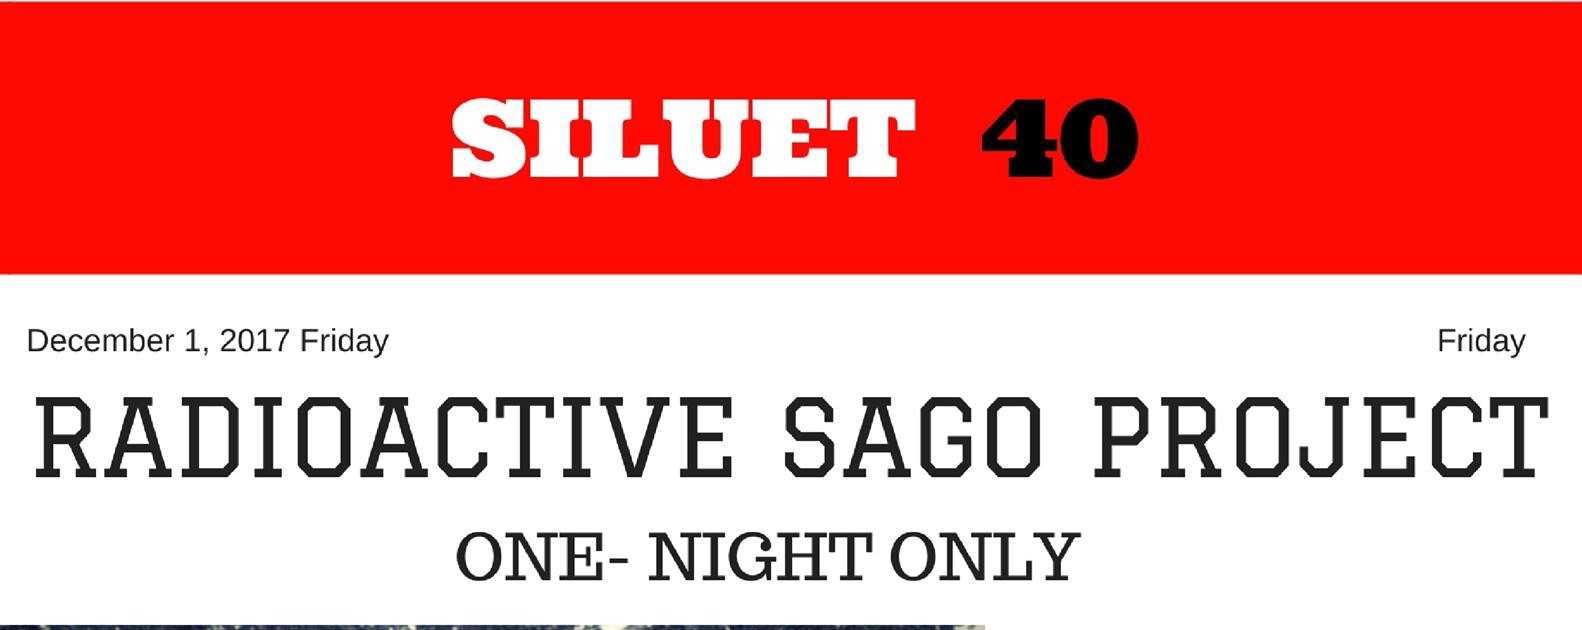 Siluet 40: Radioactive Sago Project (One-Night Only)